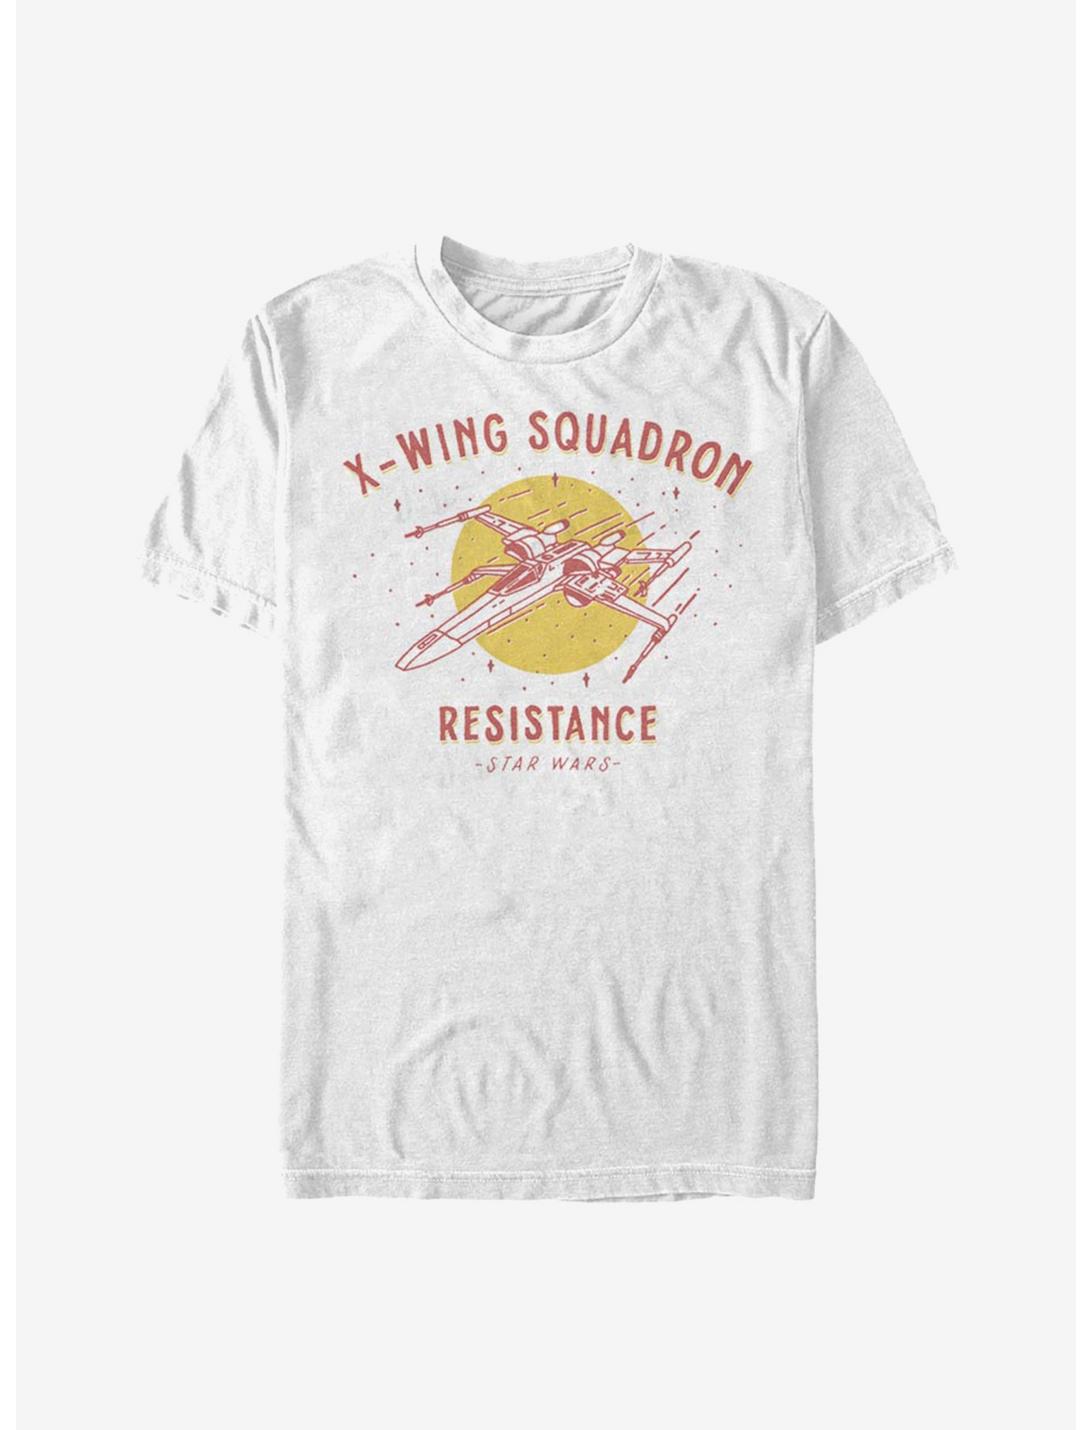 Star Wars Episode IX The Rise Of Skywalker X-Wing Squadron Resistance T-Shirt, WHITE, hi-res